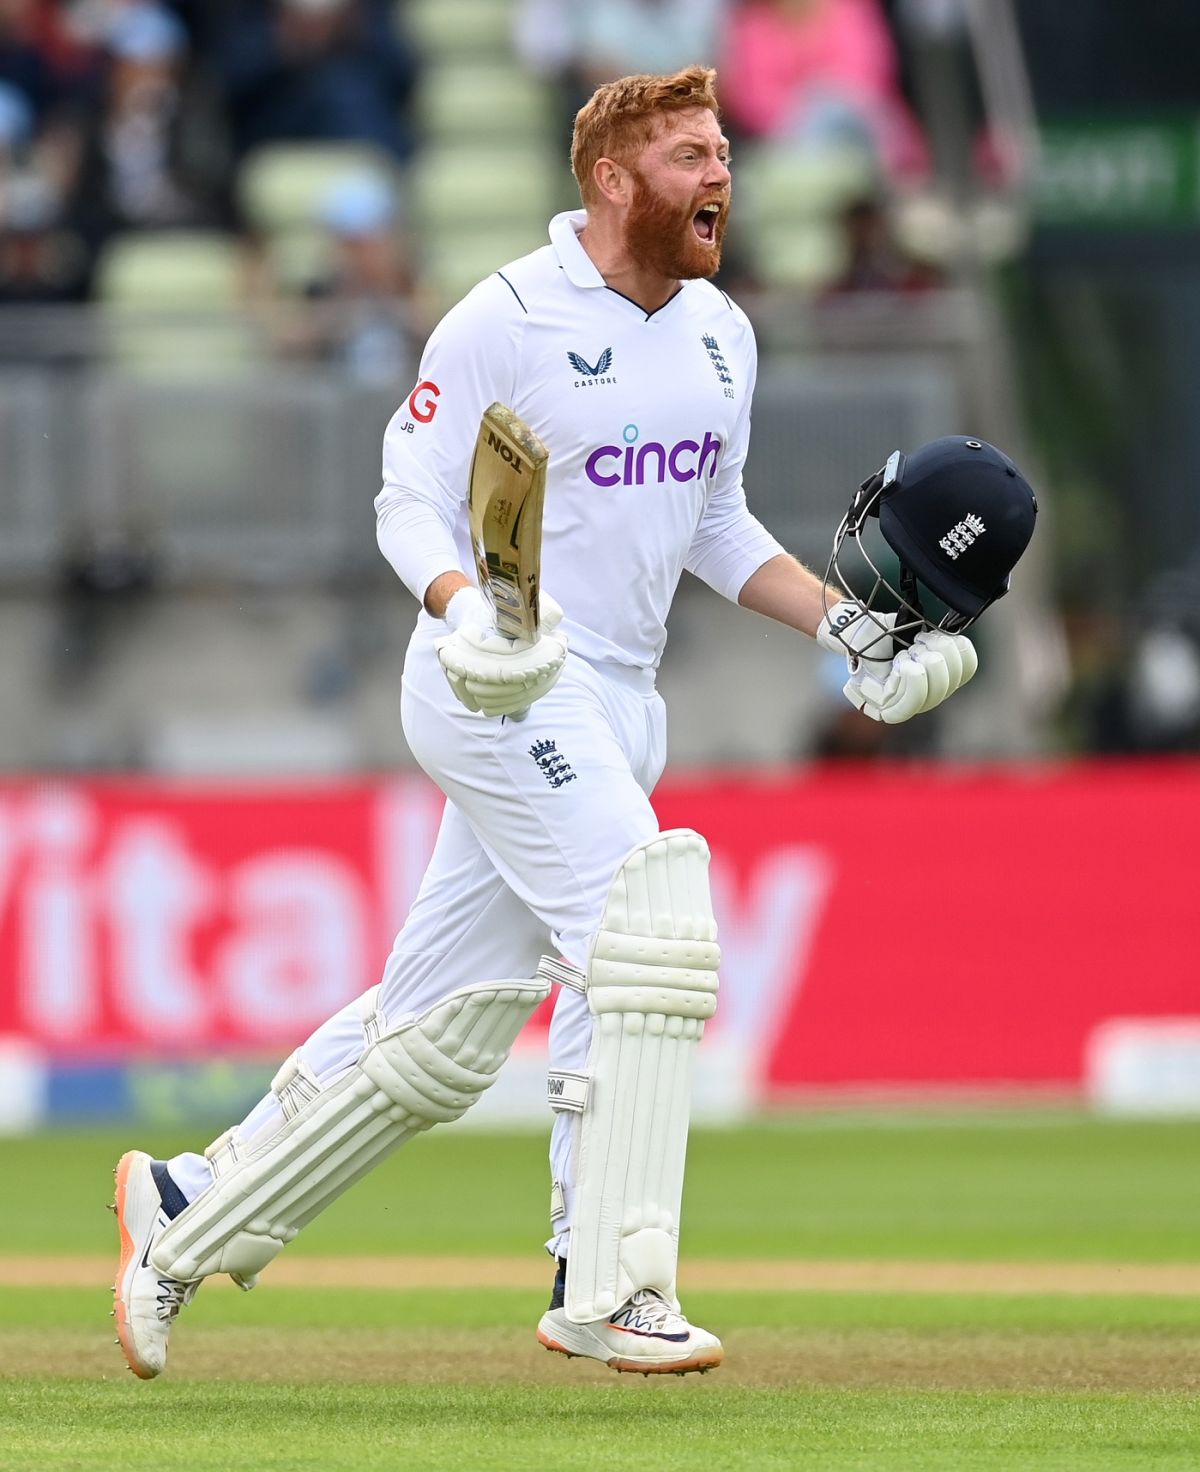 Jonny Bairstow is all pumped up after scoring his century, England vs India, 5th Test, Birmingham, 3rd Day, July 3, 2022
